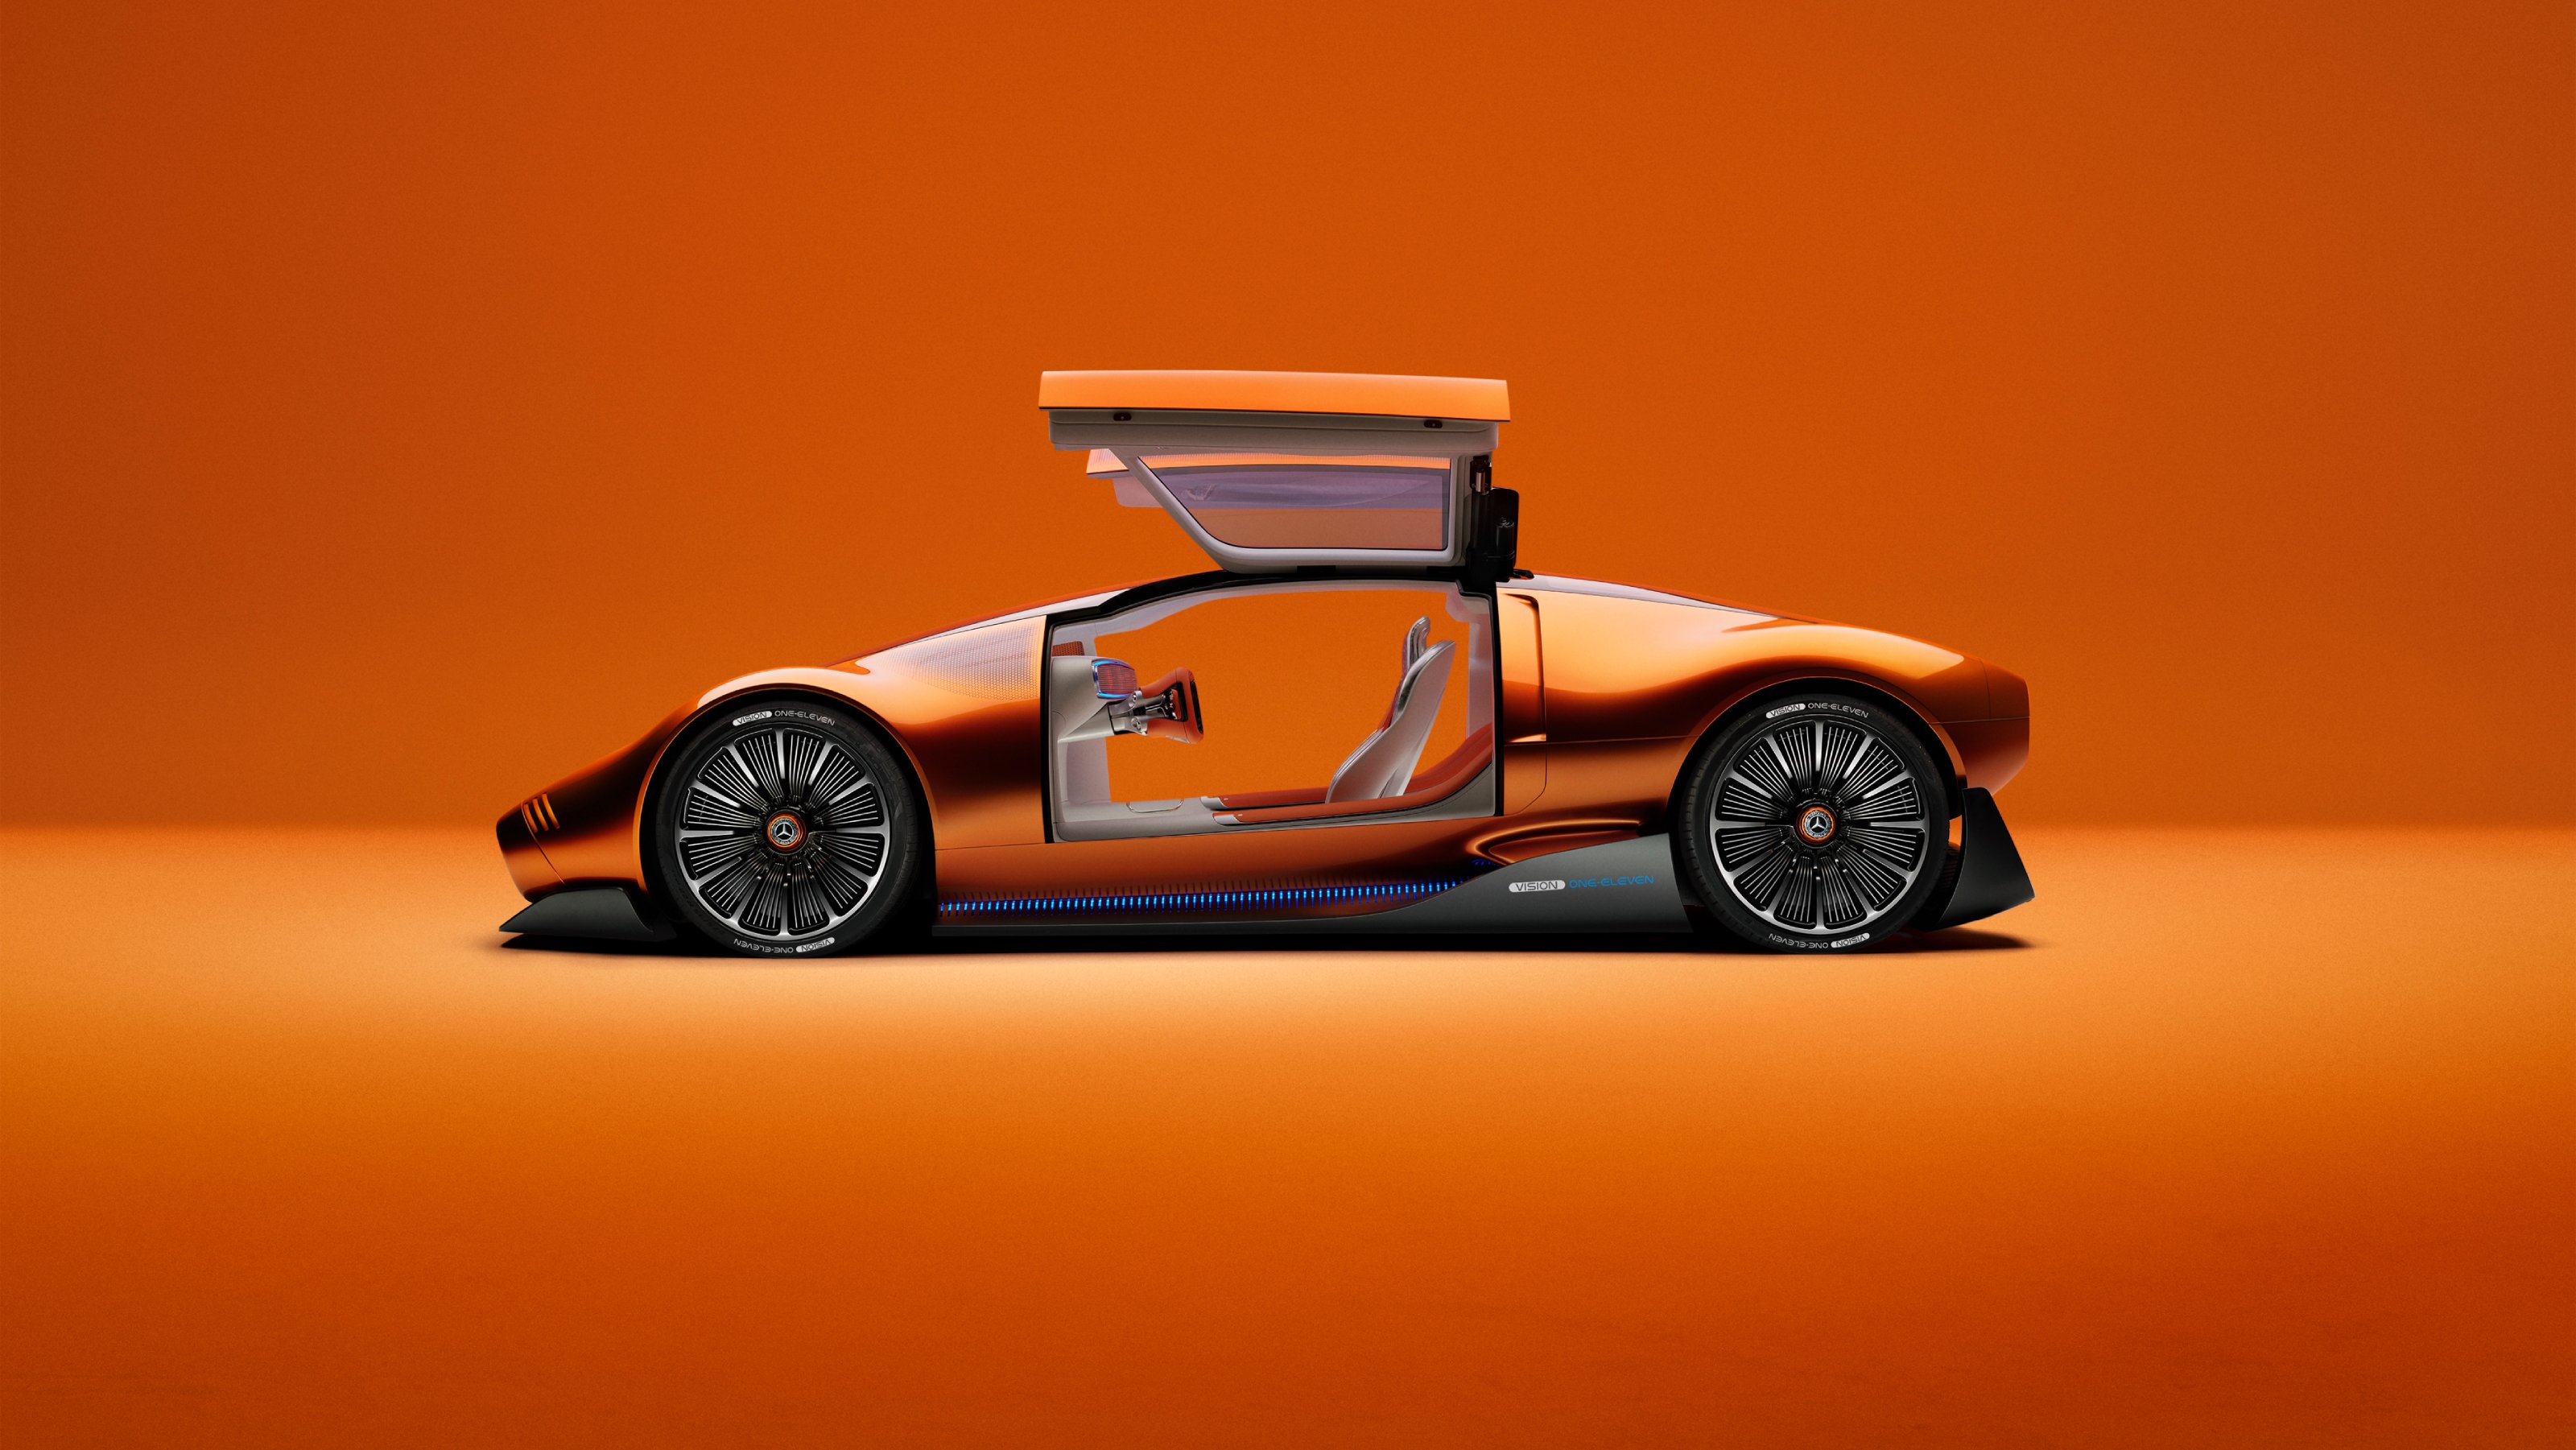 Project Maybach with Virgil Abloh 2021 4K Wallpaper - HD Car